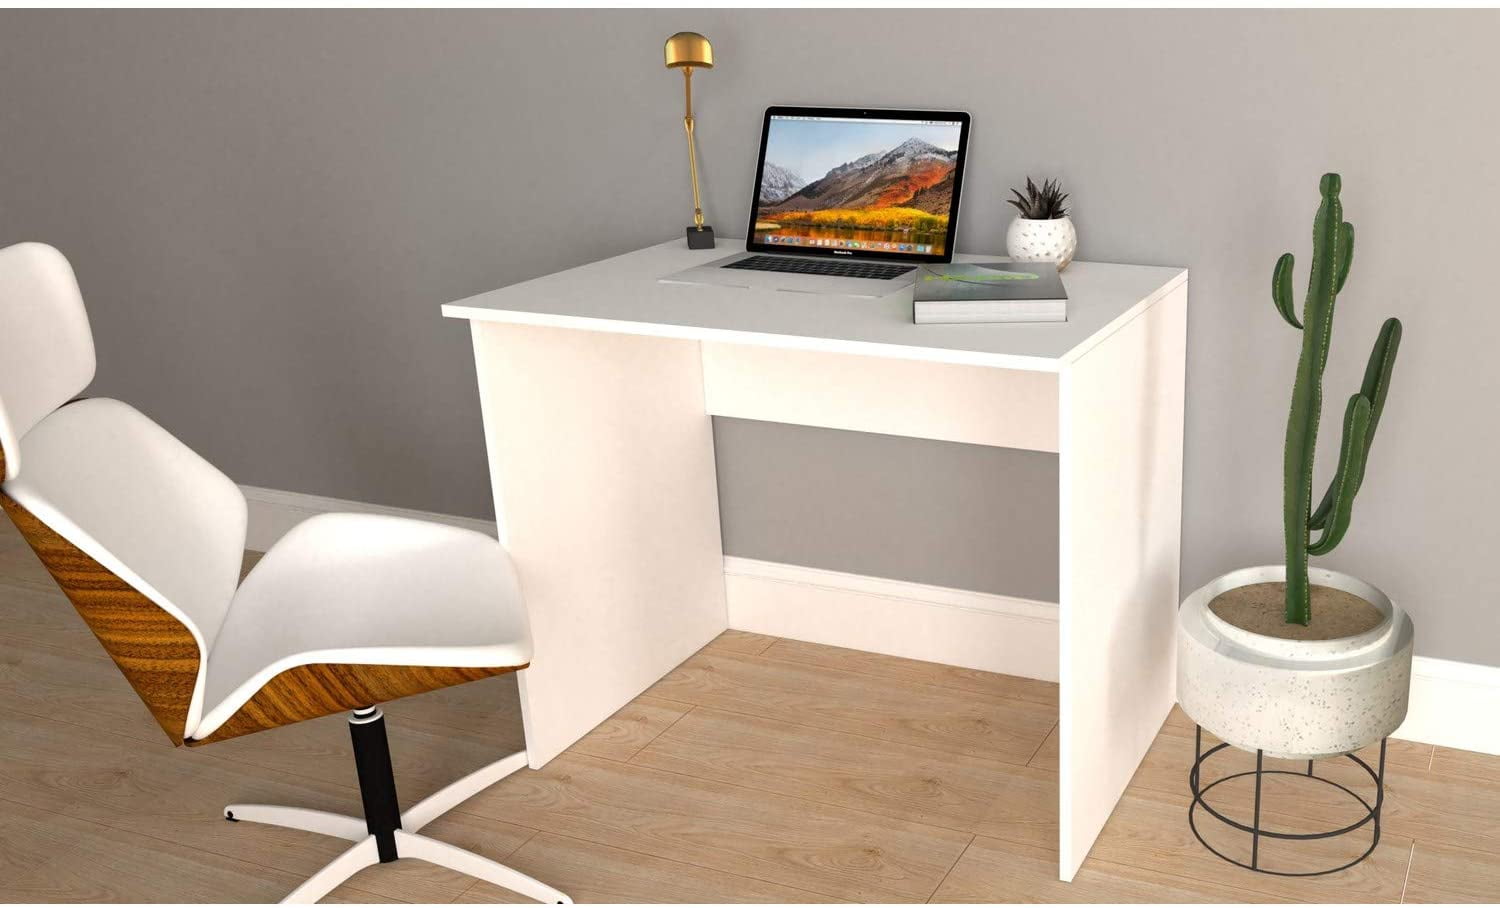 Details about   Modern Small Spaces PC Laptop Table Home Office Computer Desk Study Writing Desk 